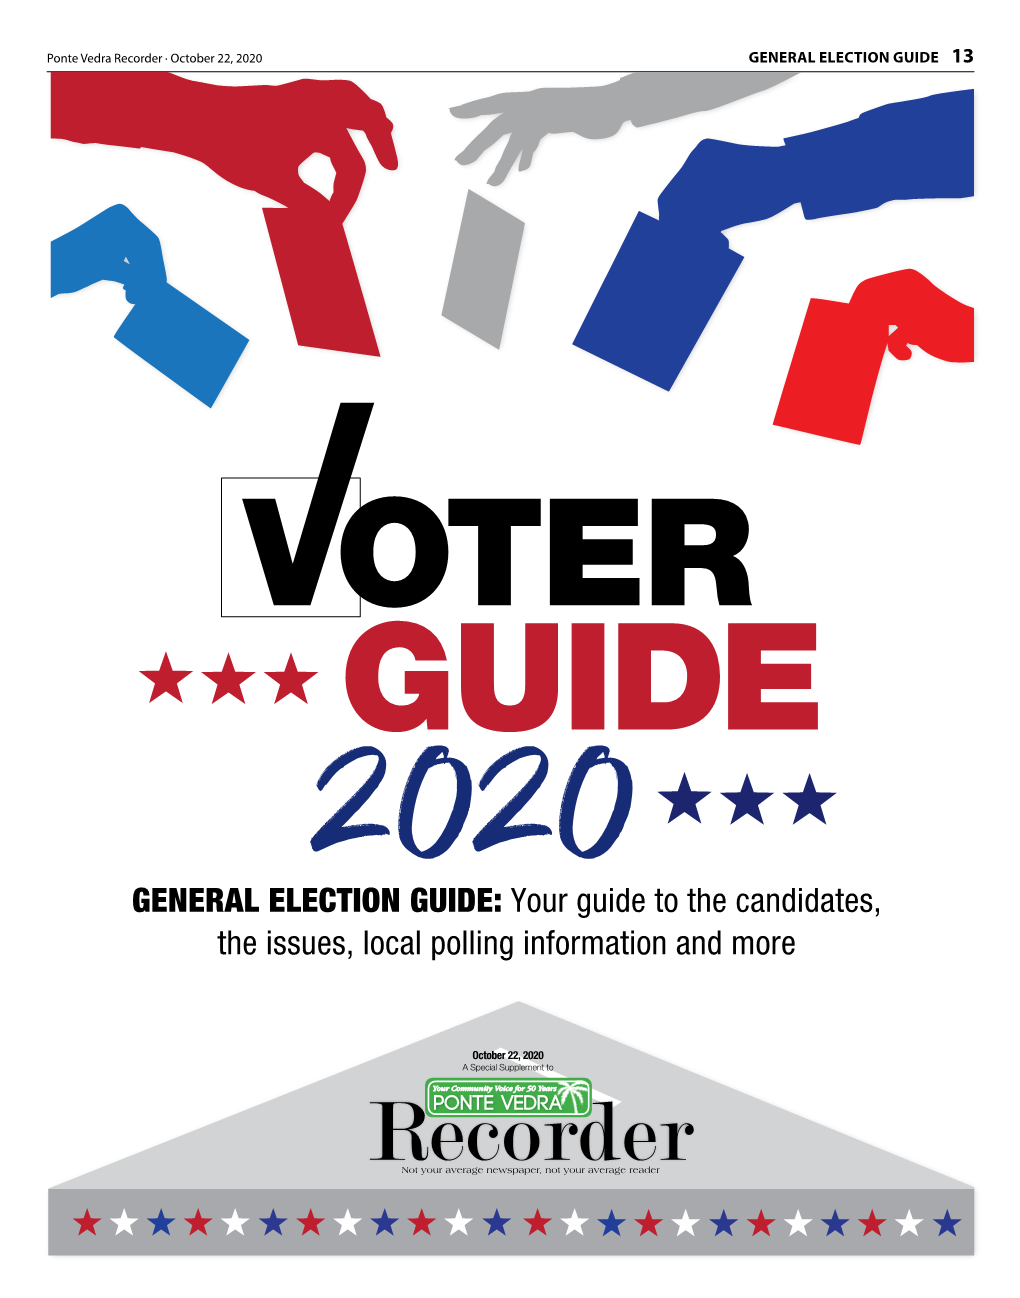 General Election Guide 13